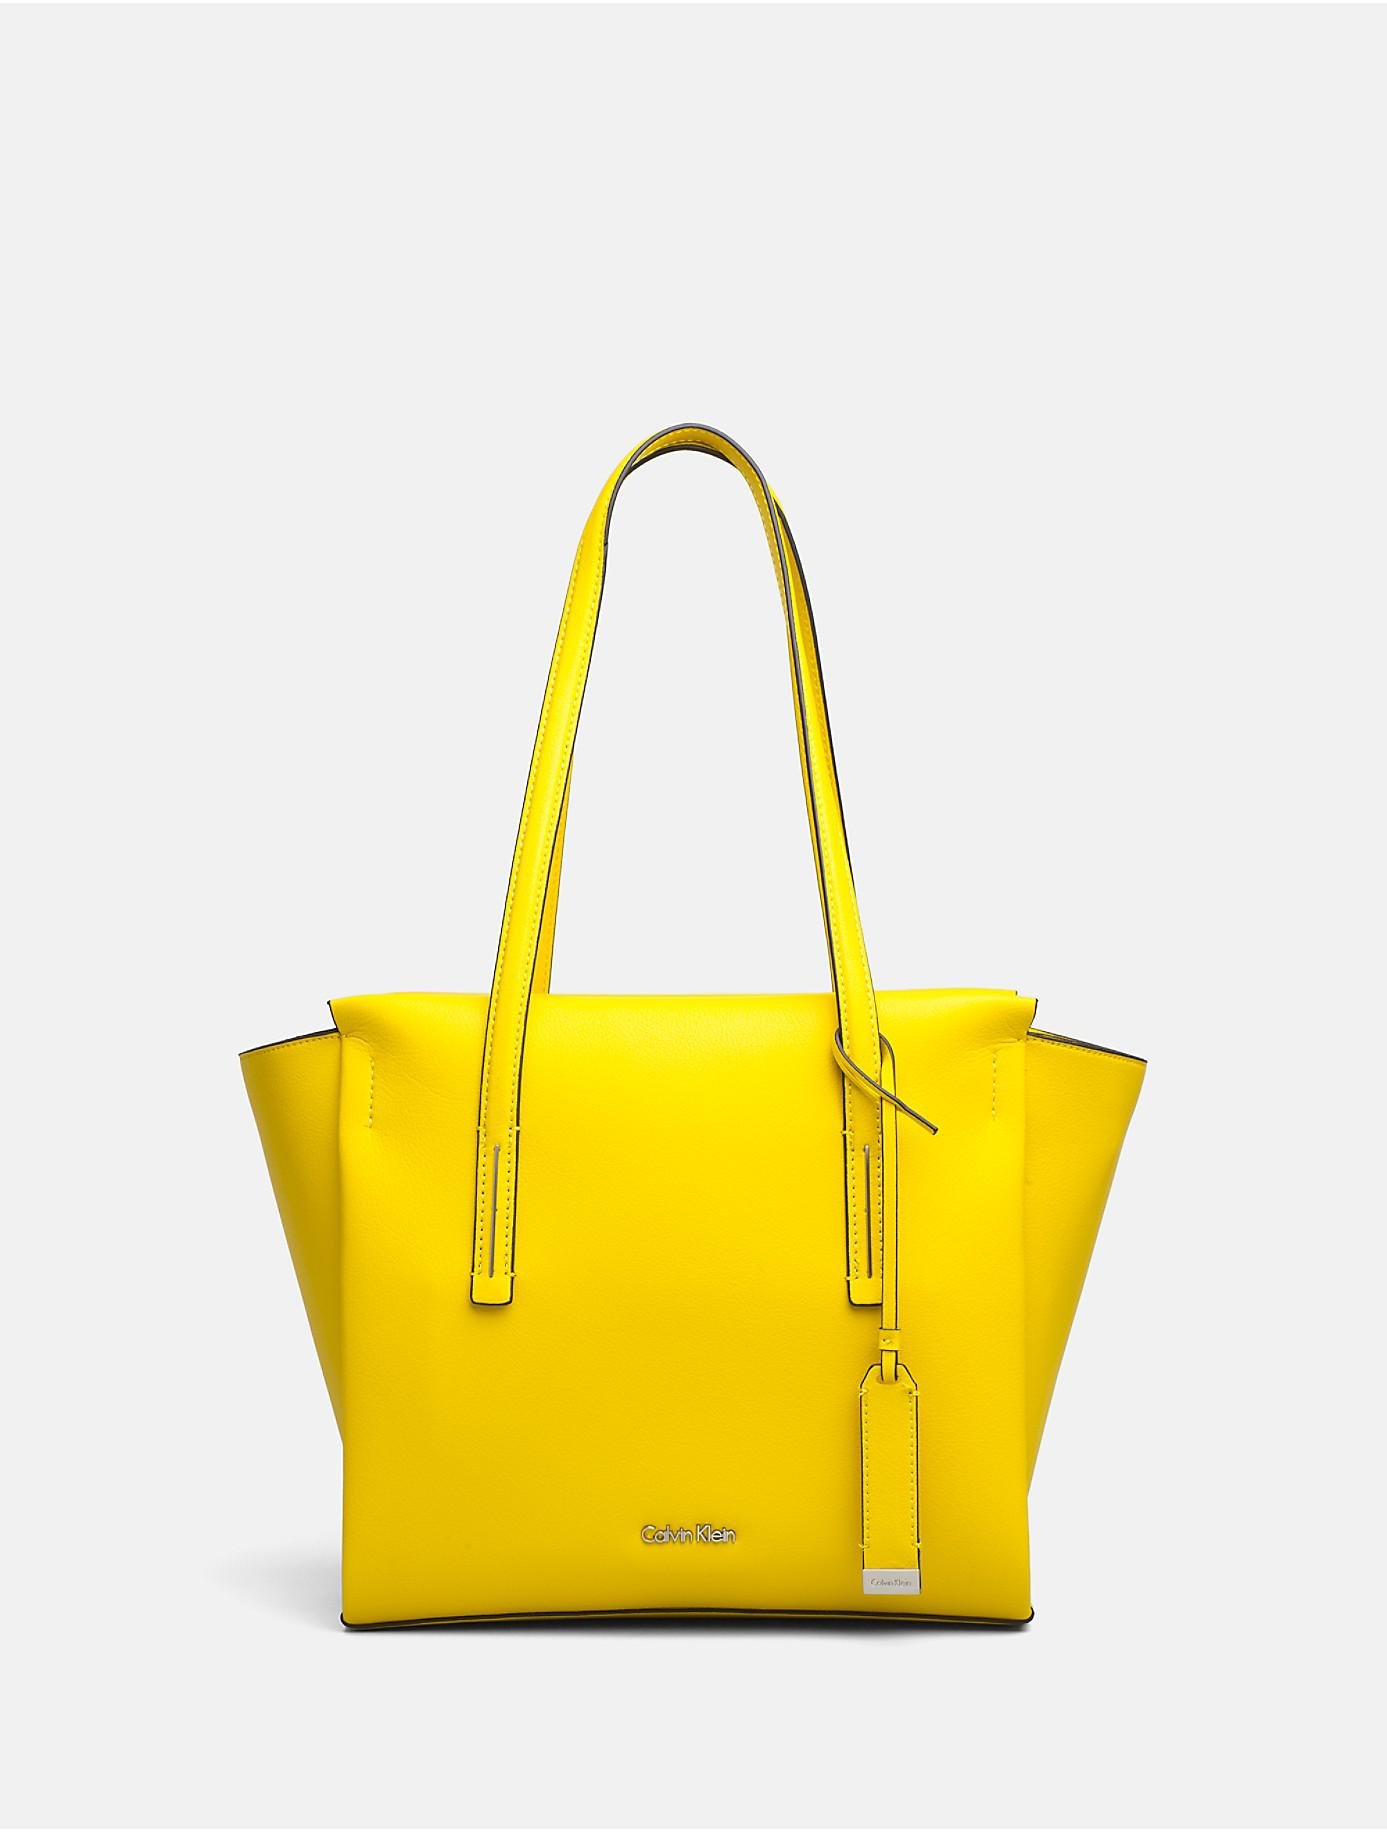 yellow calvin klein bag Cheaper Than Retail Price> Buy Clothing,  Accessories and lifestyle products for women & men -